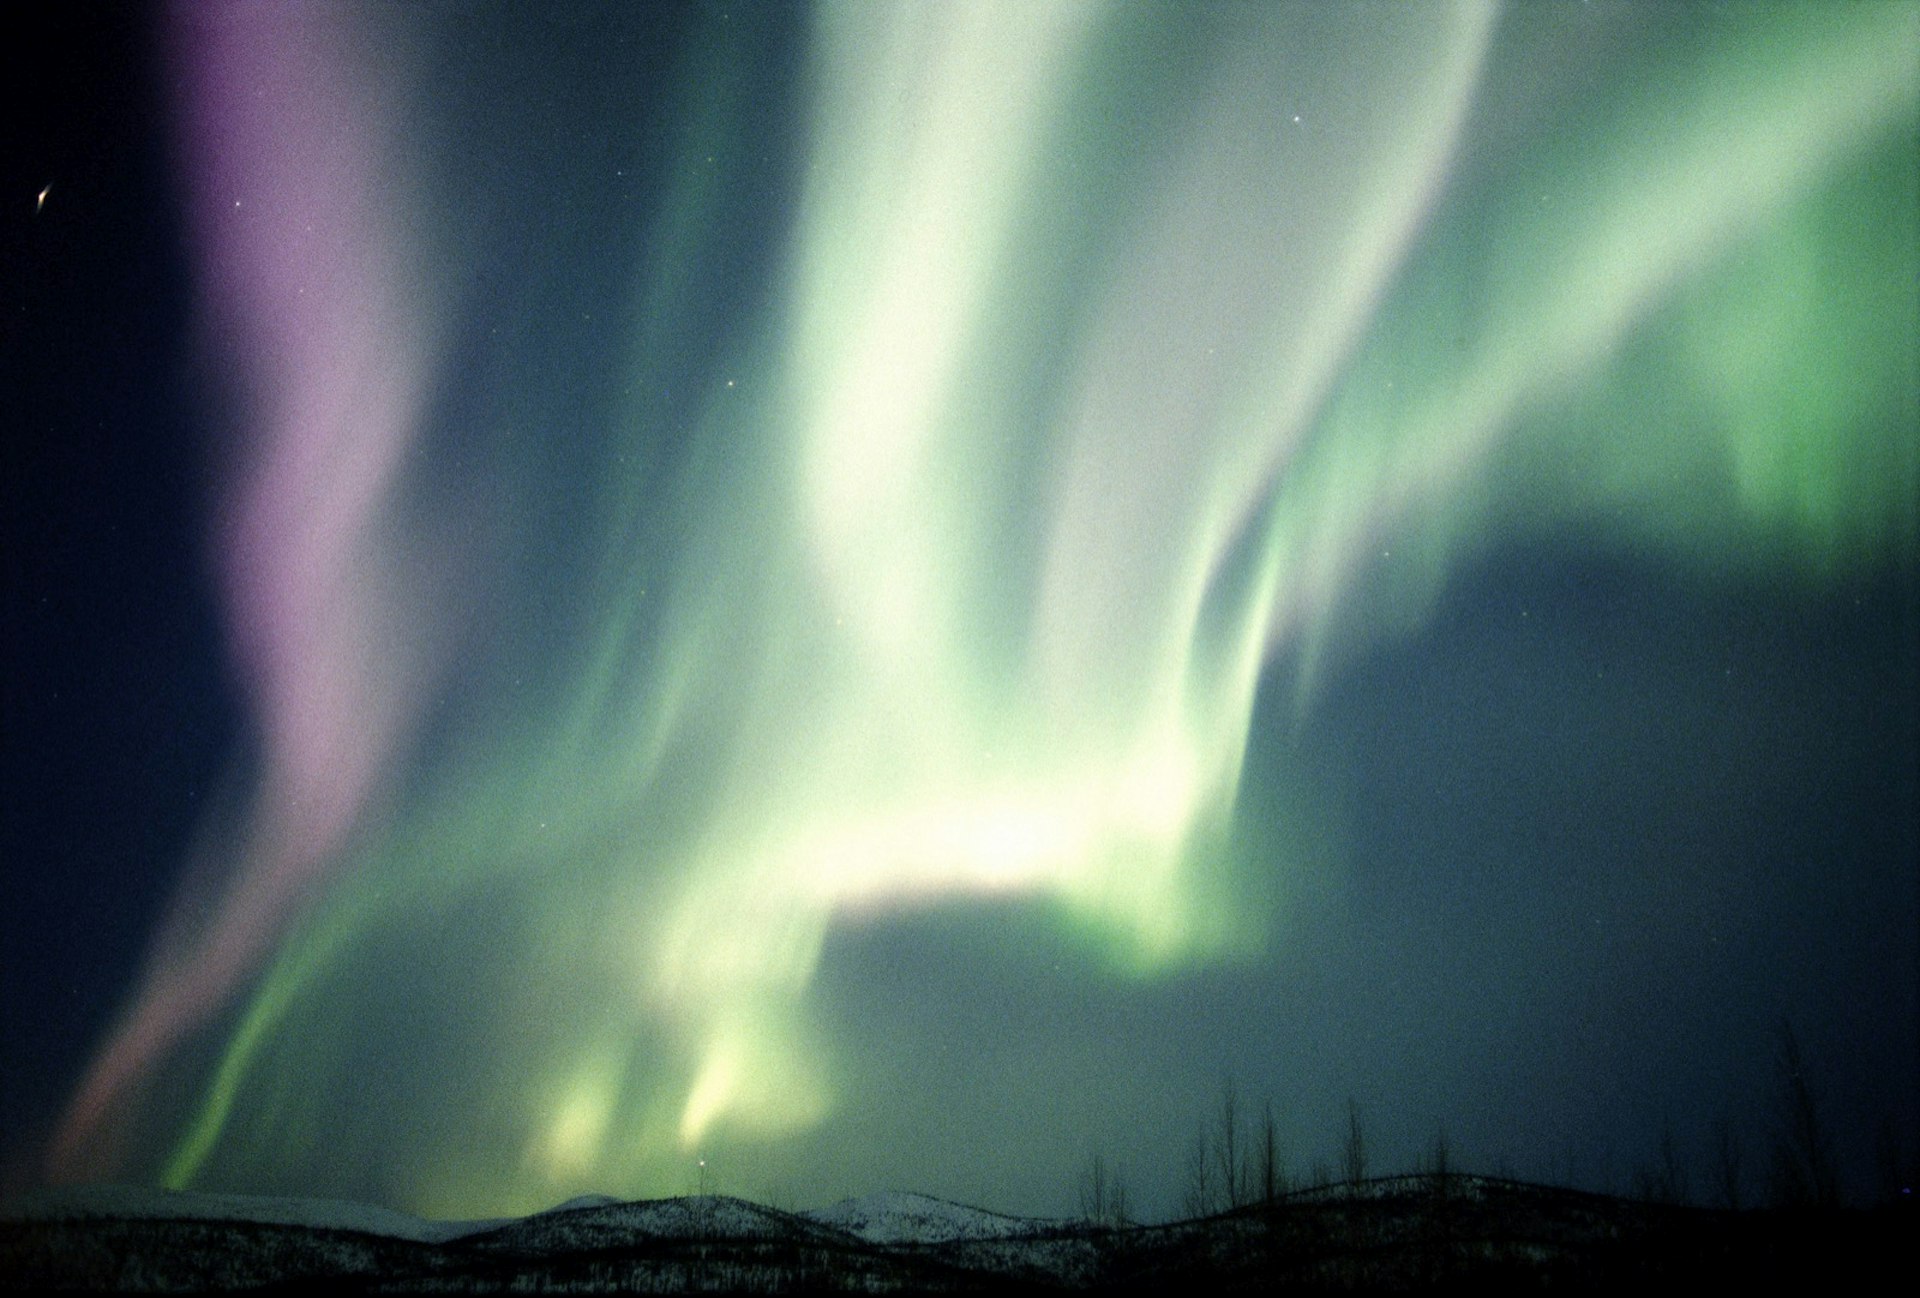 Great bands of purple and green light swirl in the night sky with the dark shapes of trees below, near Chena hot springs in Alaska